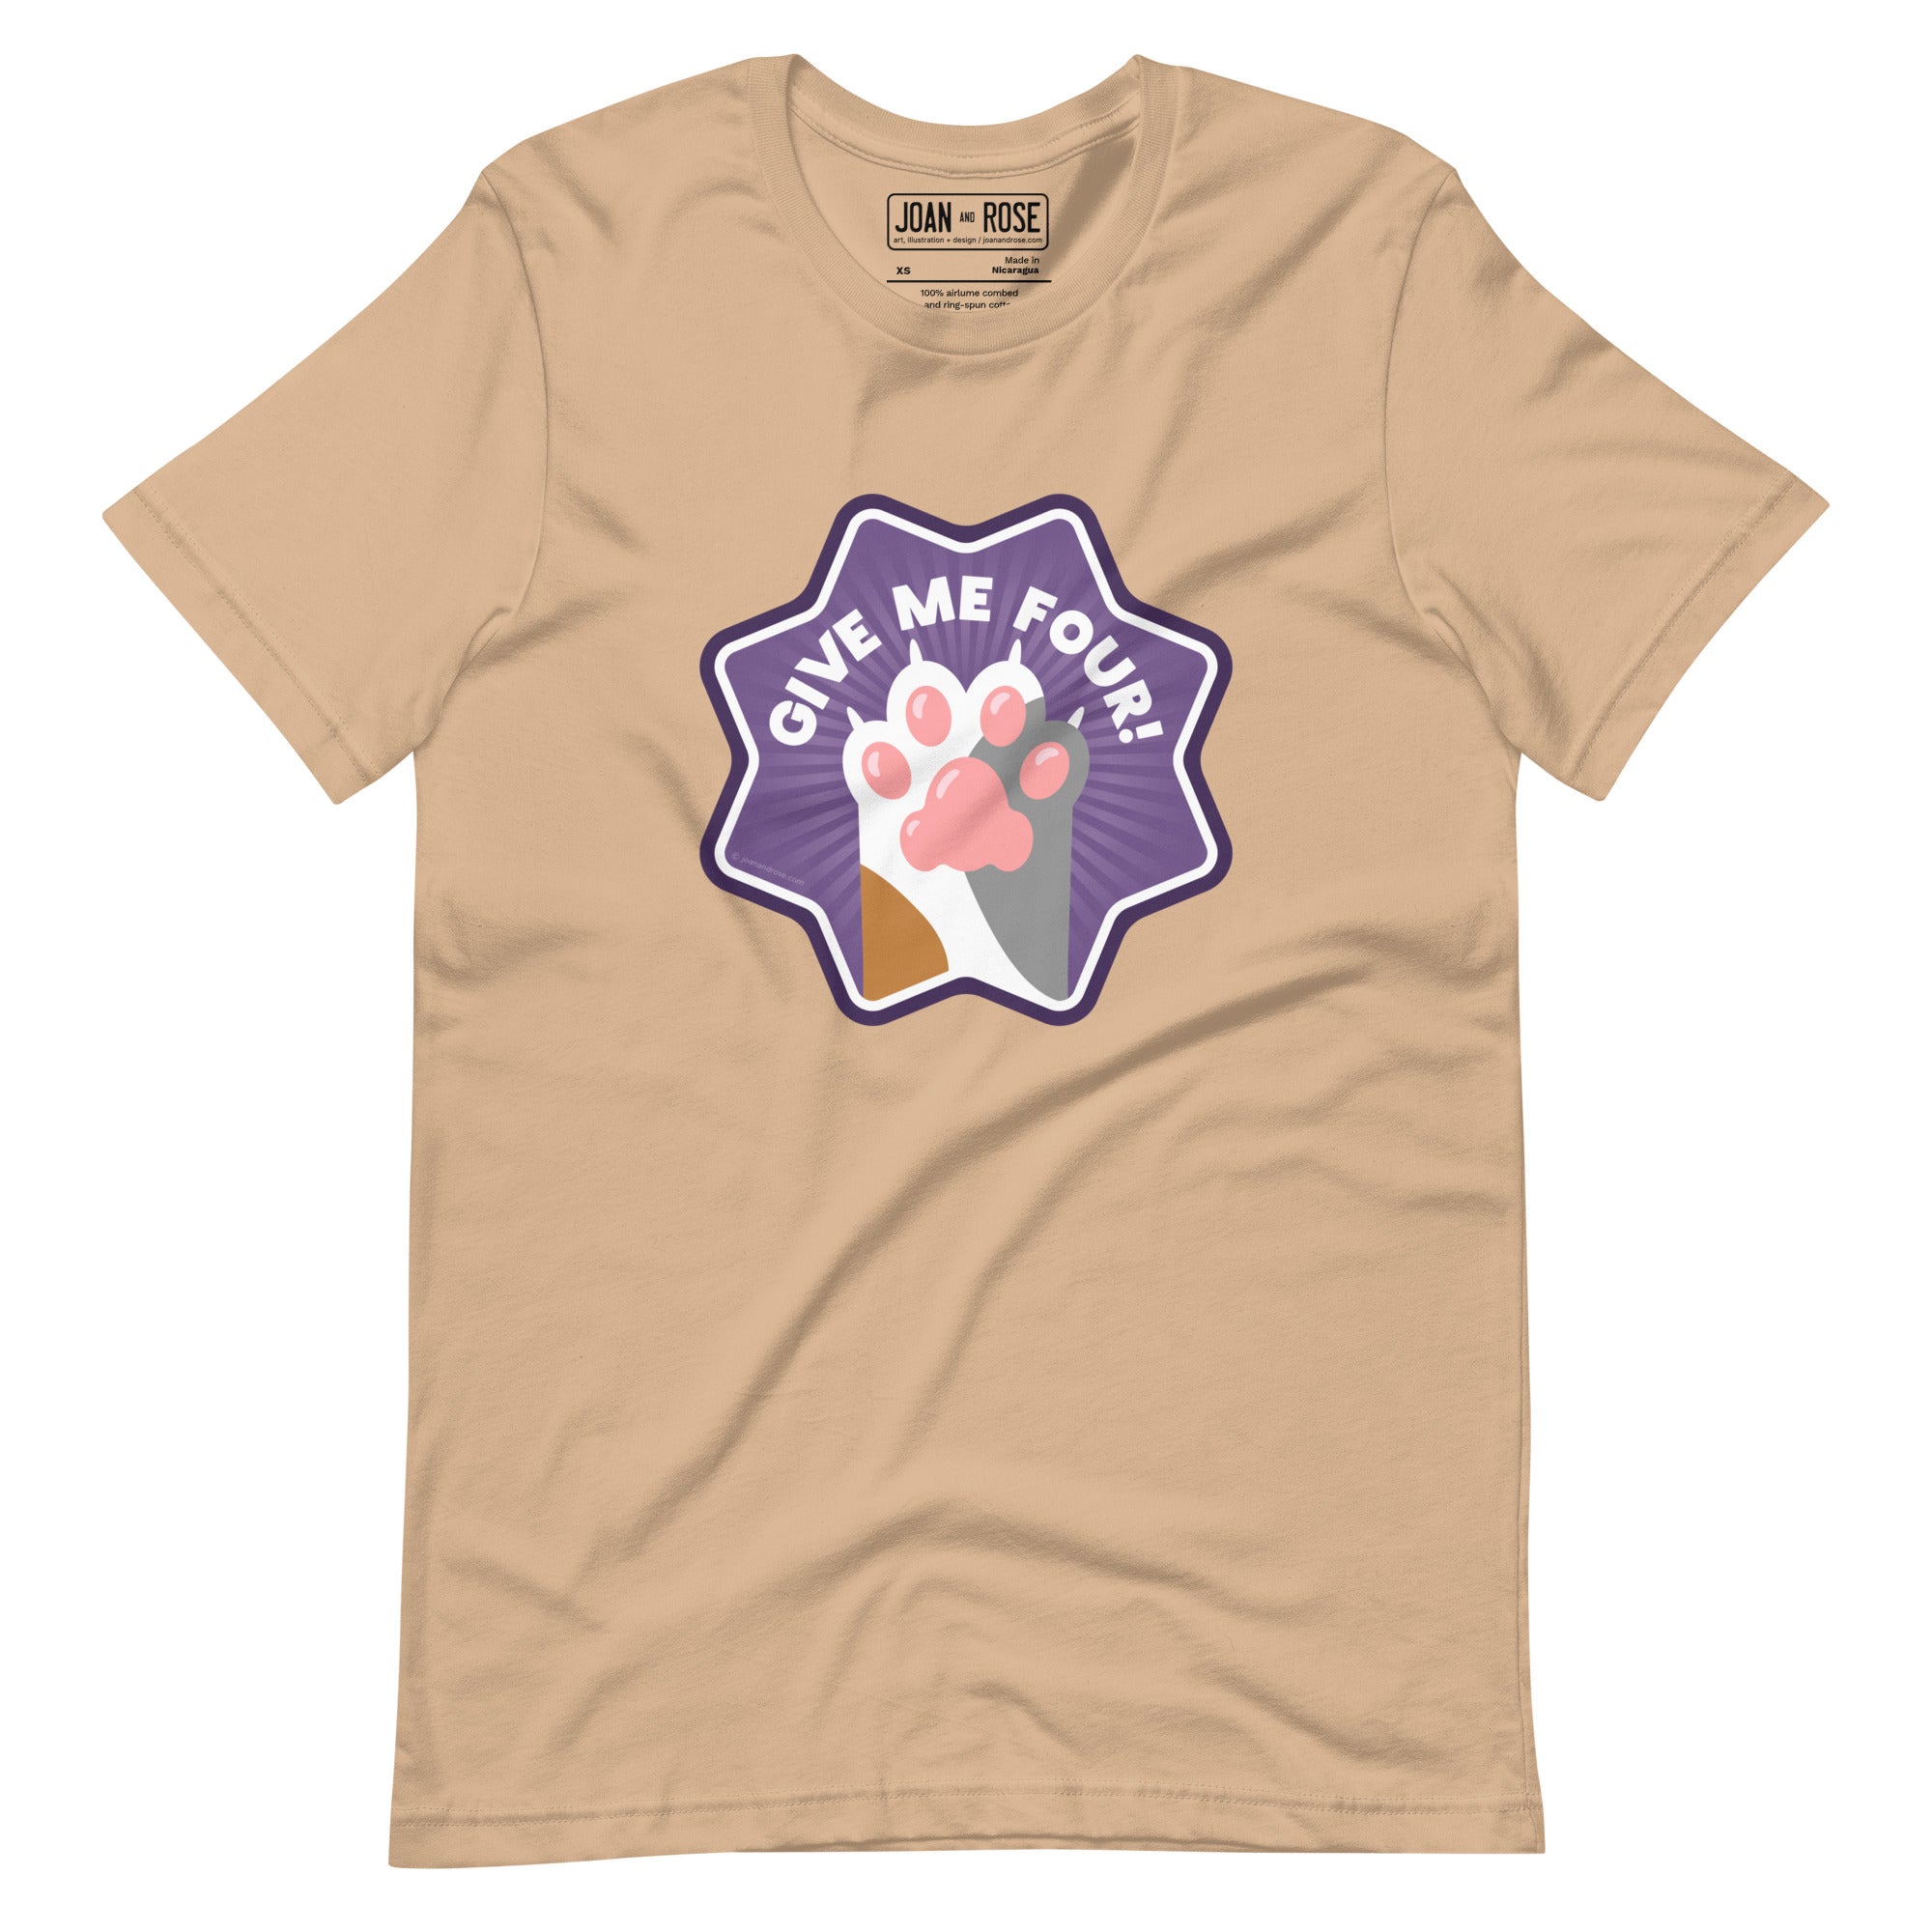 Give me four! Calico cat, Unisex T-shirt